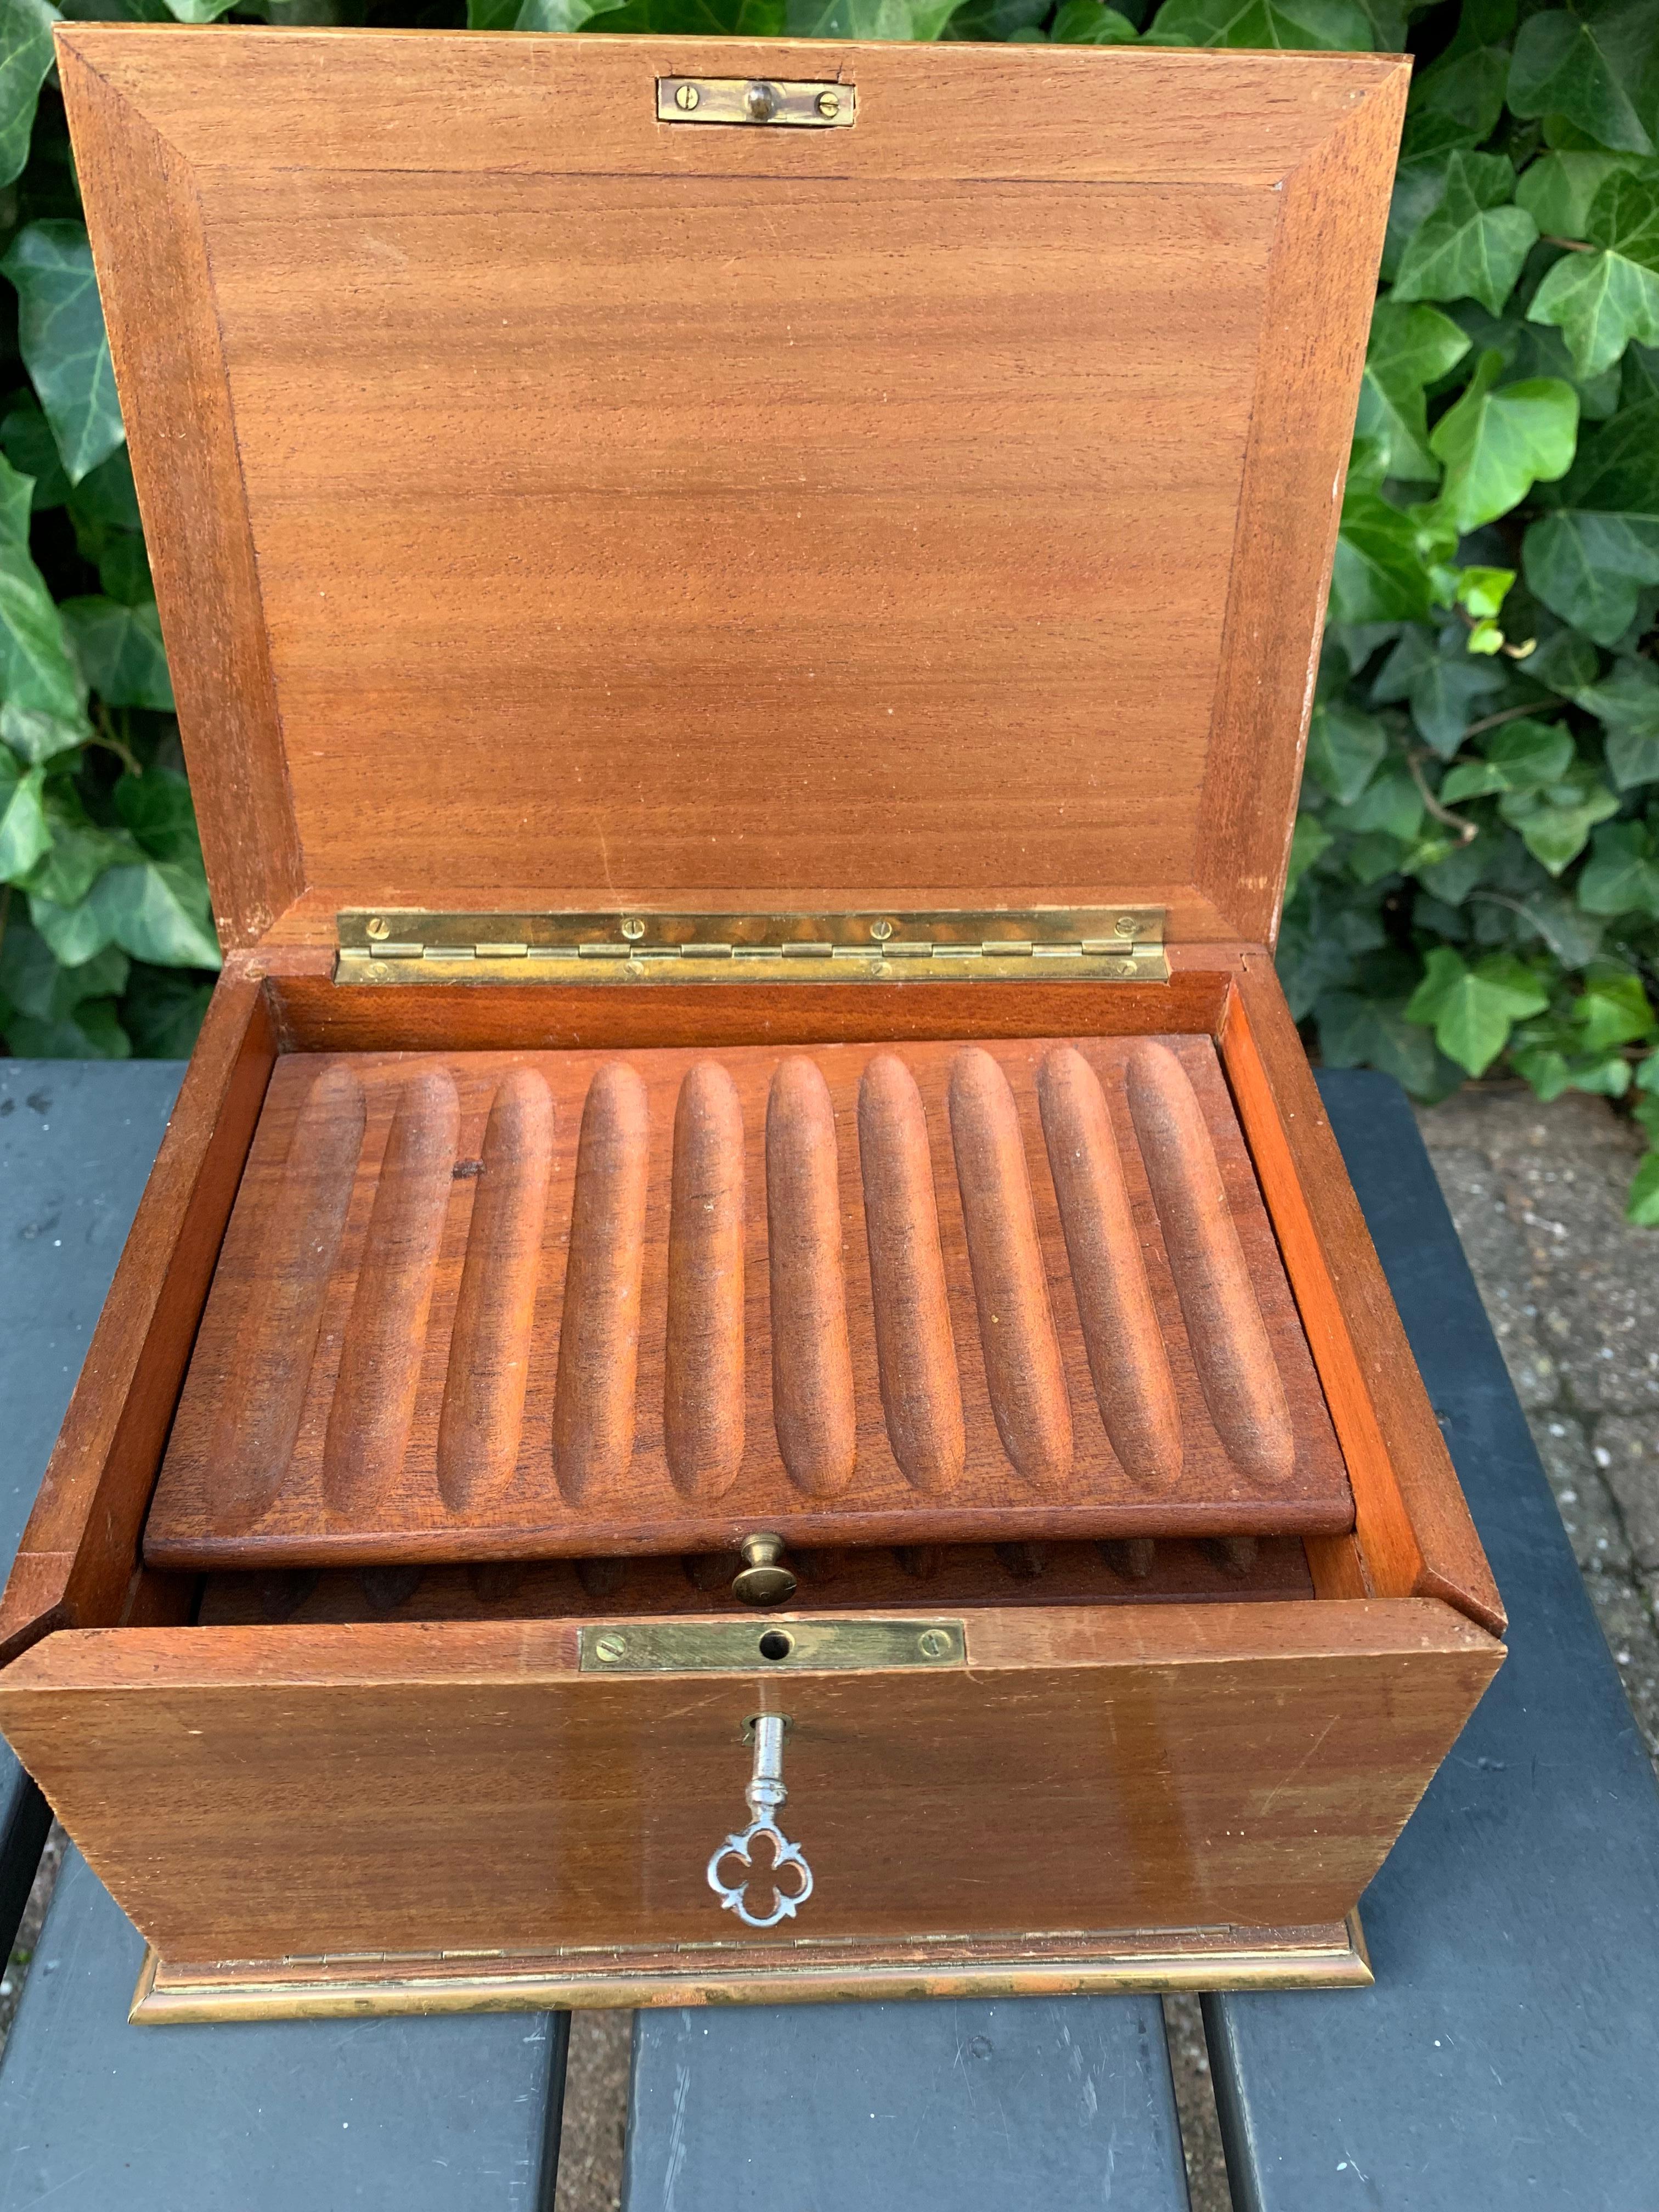 Good quality and excellent condition antique box.

This straight lined cigar box is another one of our timeless items that will also make a great gift for someone who has never owned an antique. All handcrafted in the early 20th century means that